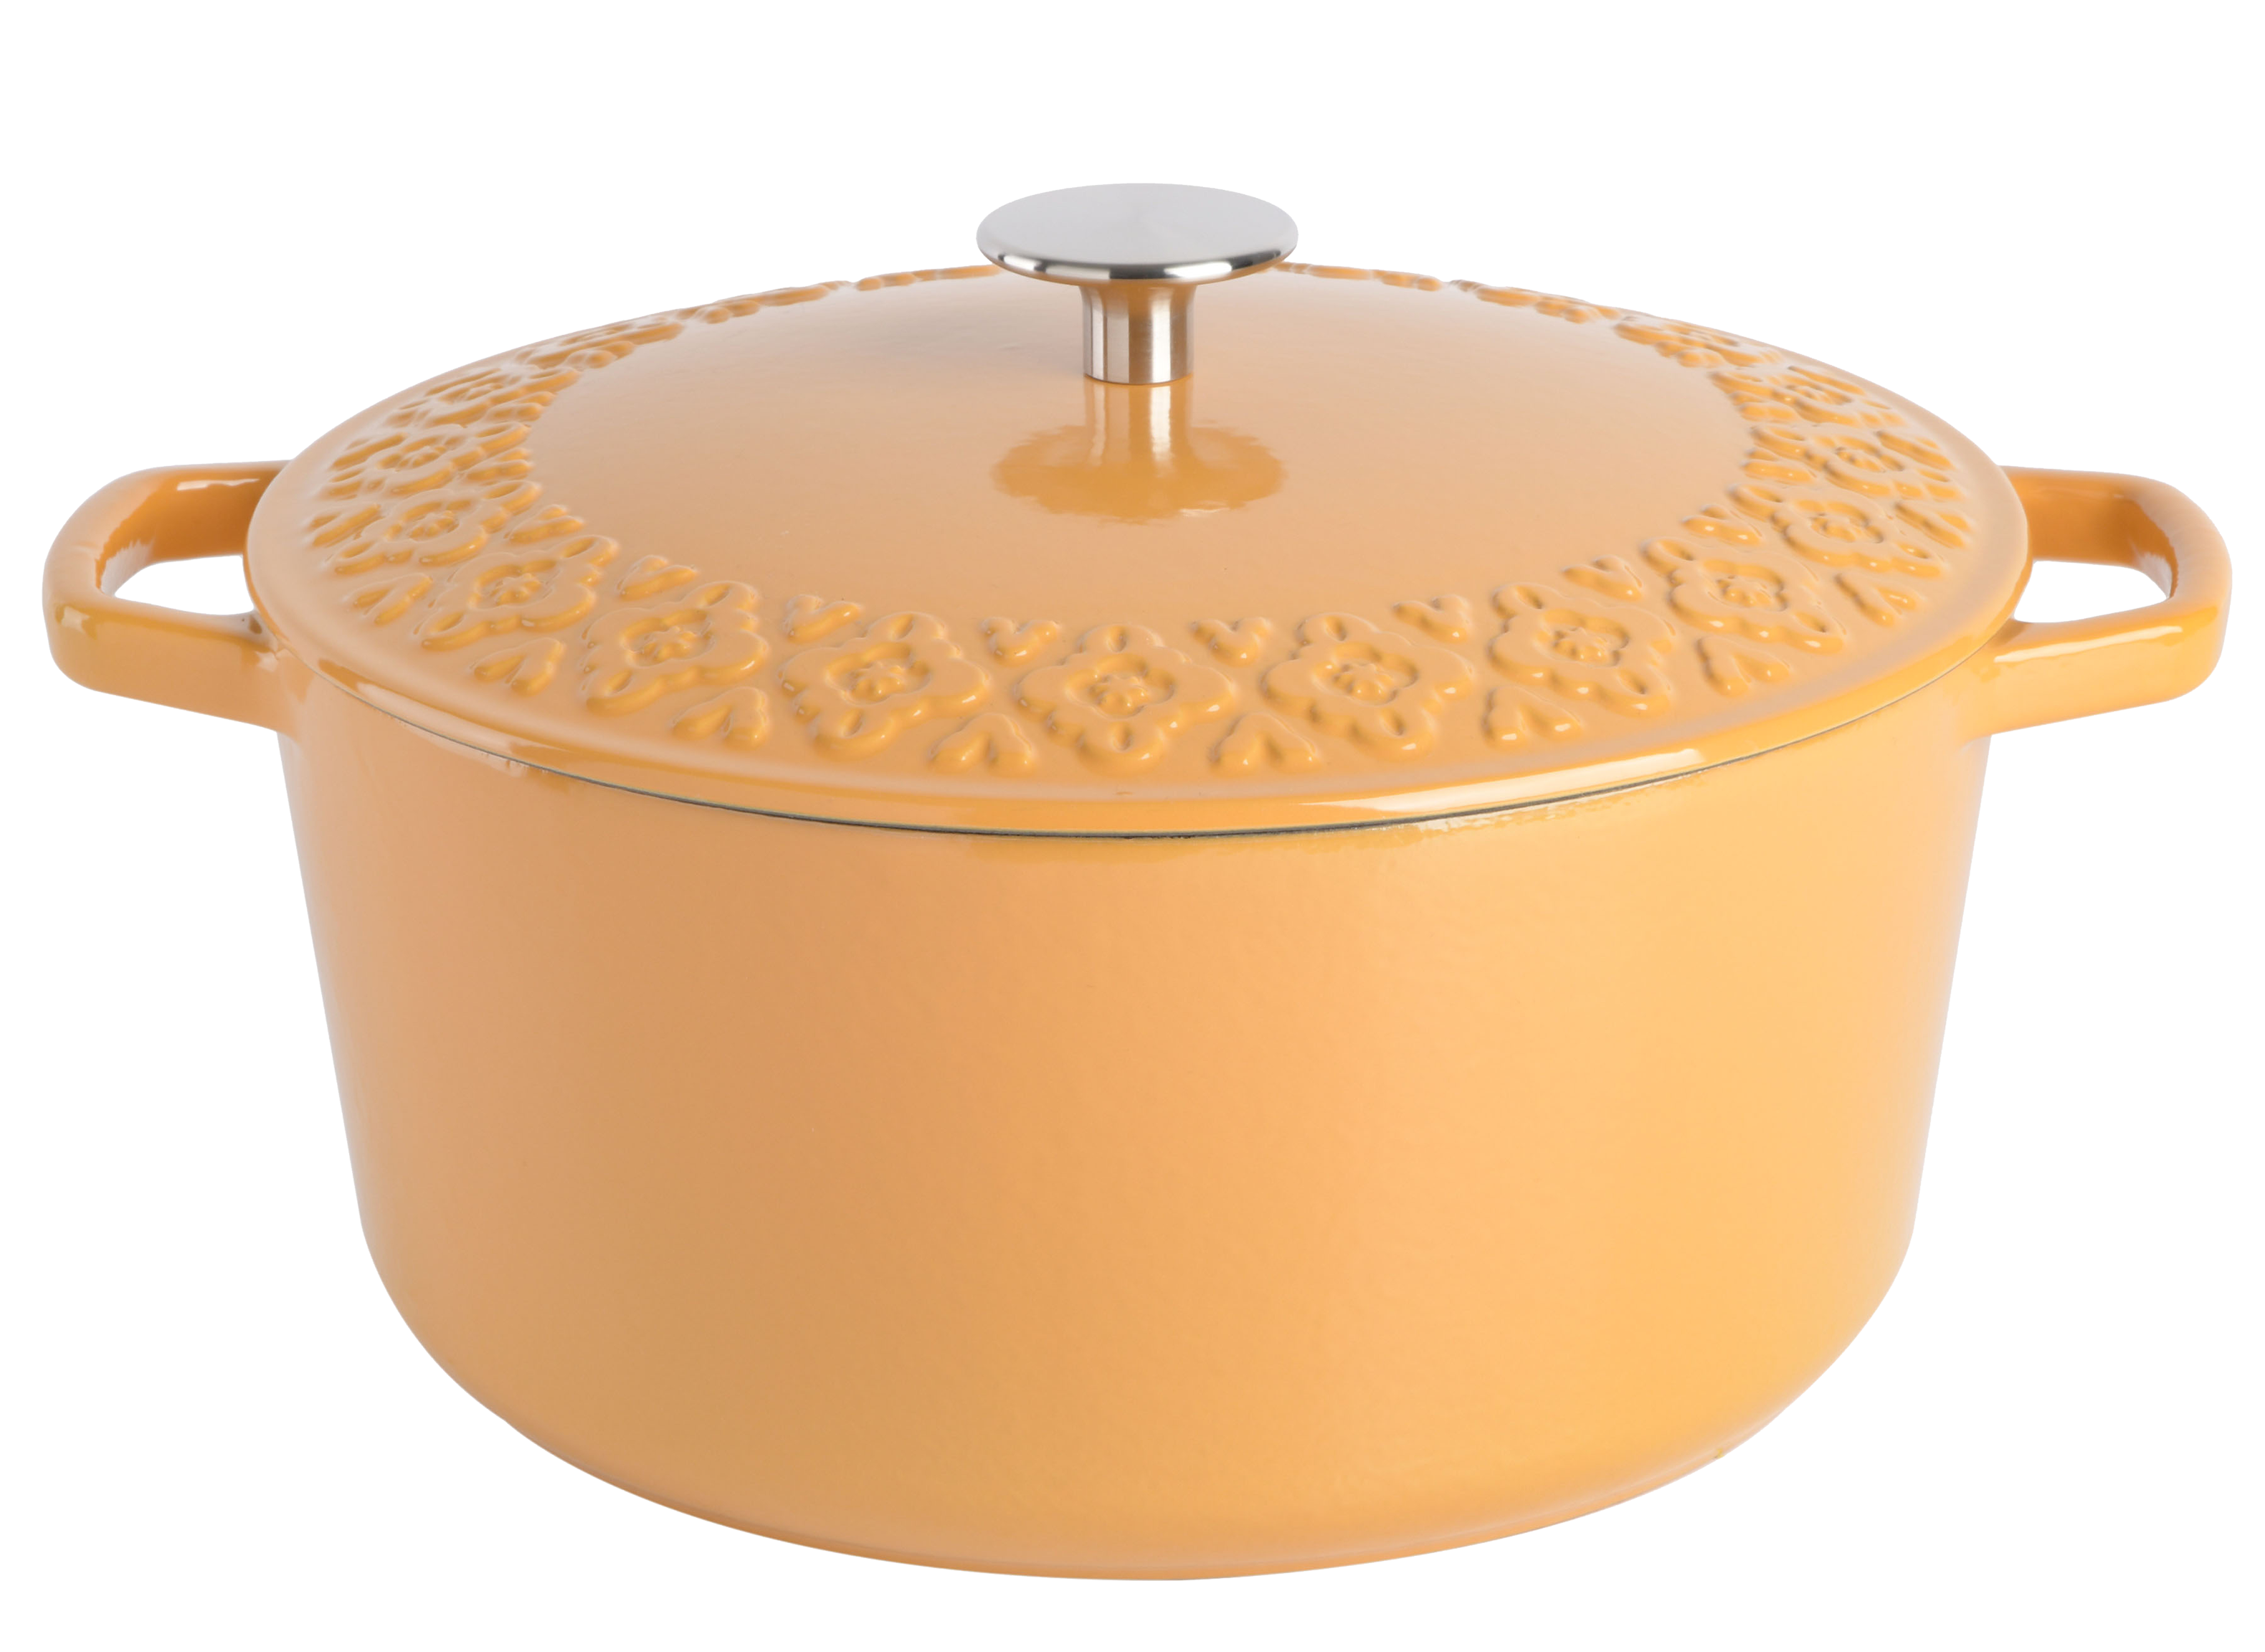 https://crdms.images.consumerreports.org/prod/products/cr/models/407665-dutch-ovens-spice-by-tia-mowry-savory-saffron-96240-02rr-10032135.png